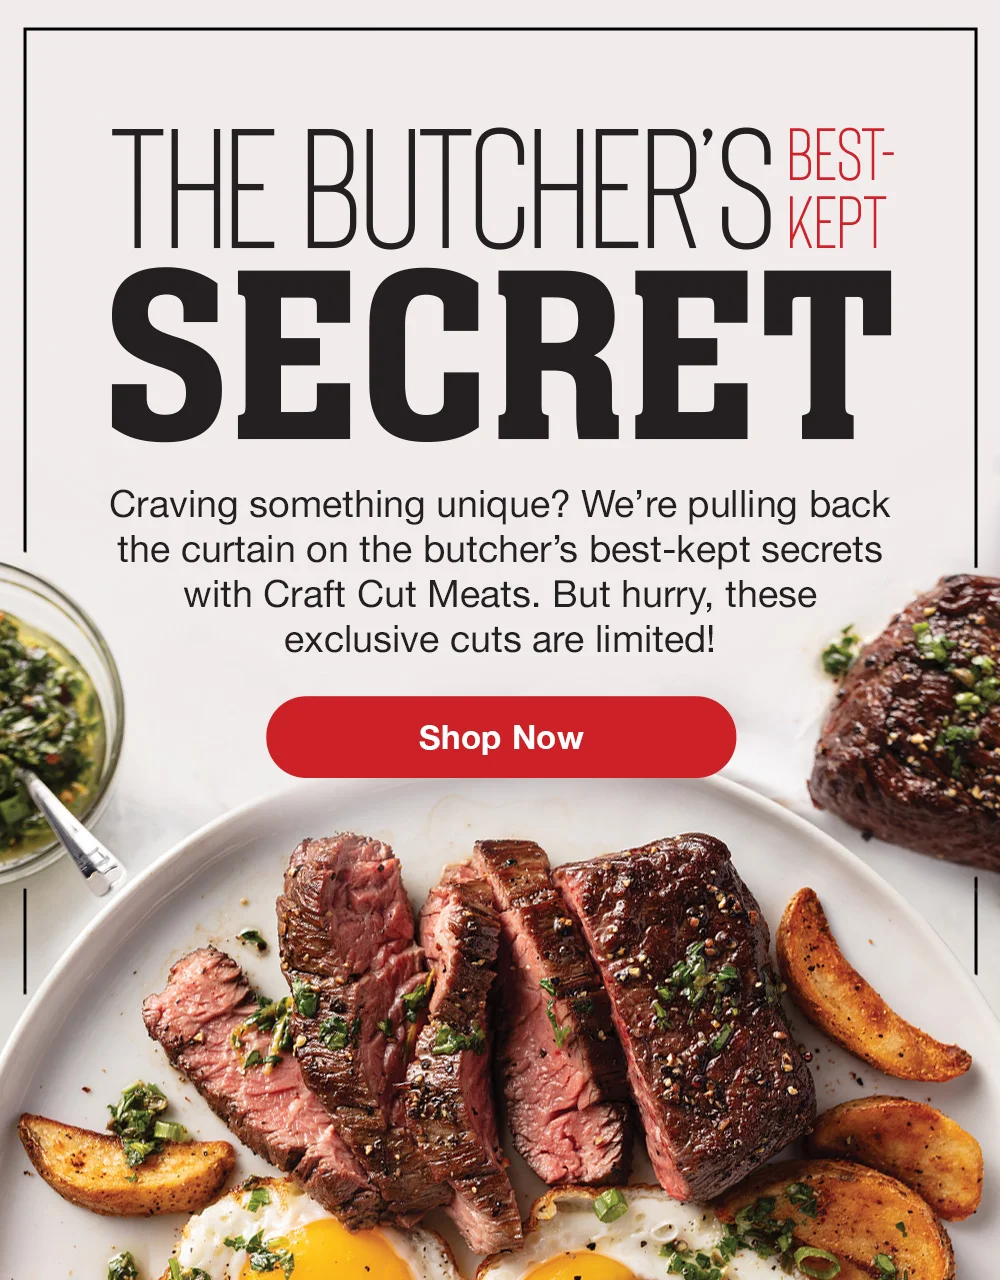 THE BUTCHER'S BEST-KEPT SECRET | Craving something unique? We're pulling back the curtain on the butcher's best-kept secrets with Craft Cut Meats. But hurry, these exclusive cuts are limited! || SHOP NOW